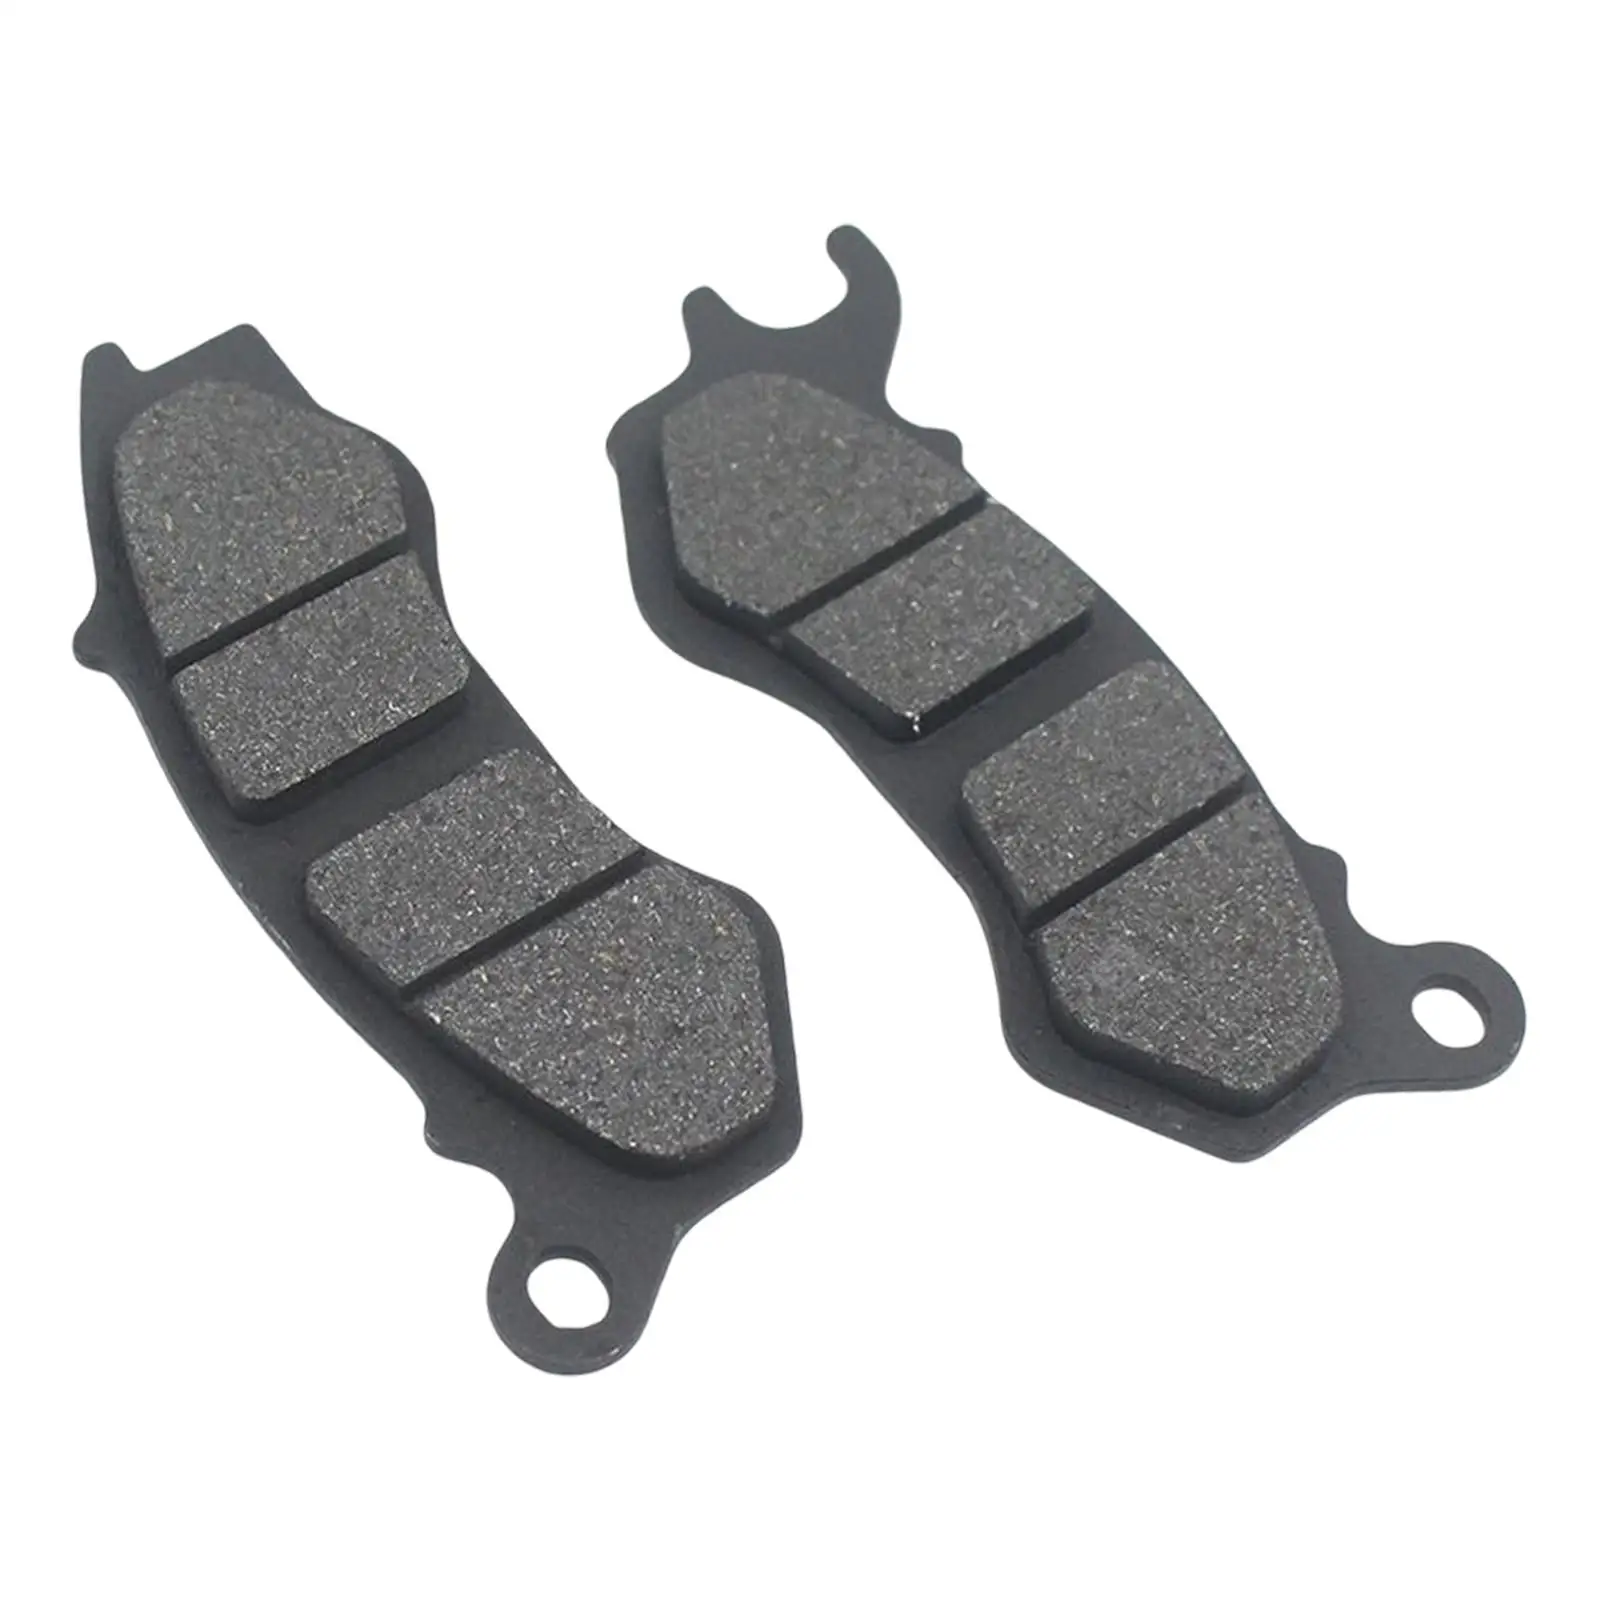 Front Brake Pads for Honda PCX 125 150 - High-Quality Wood Material, Easy Inst - £16.47 GBP